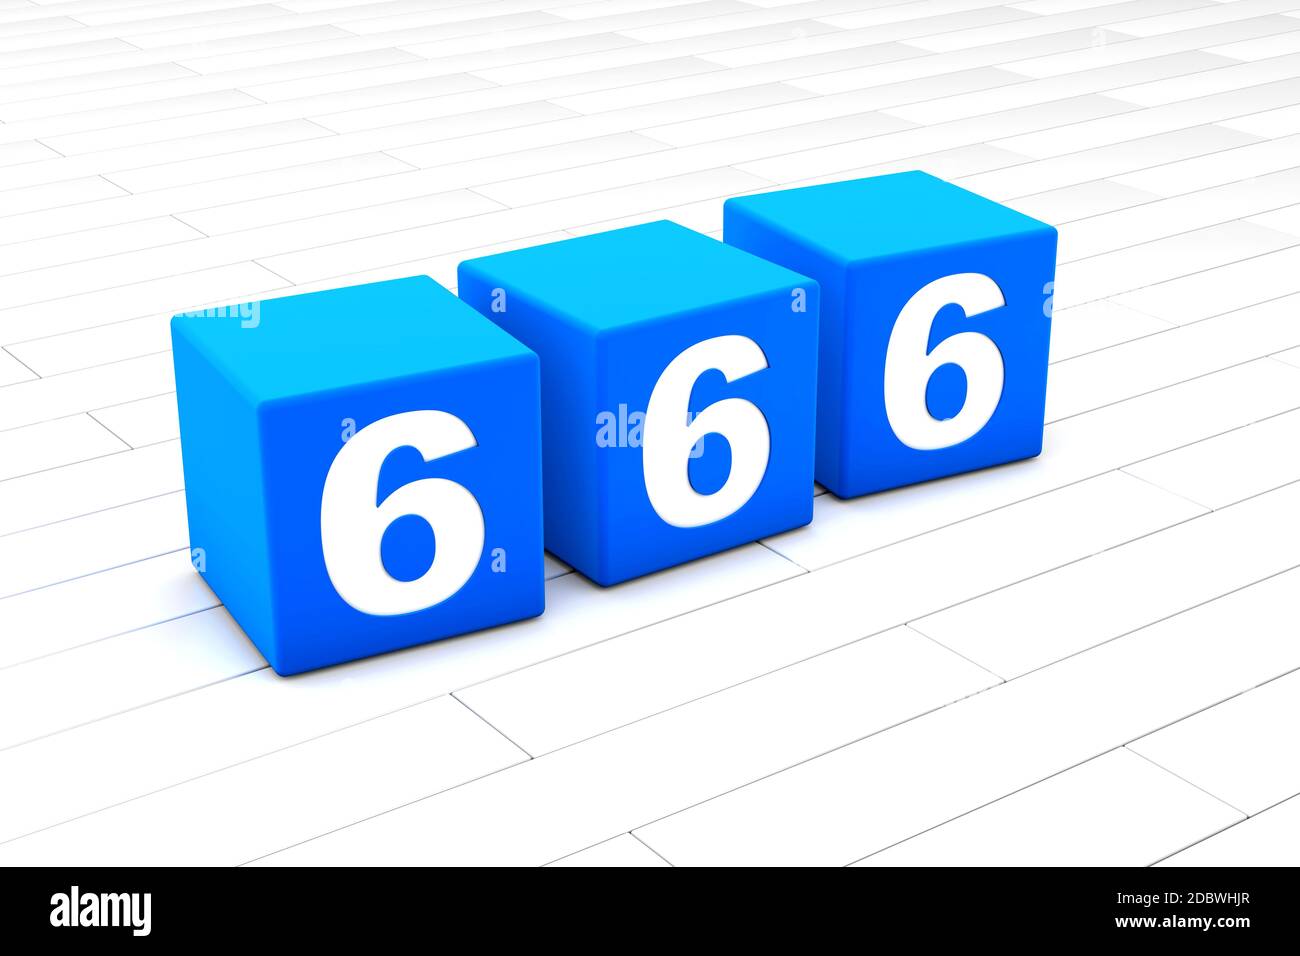 3D rendered illustration of the symbolic number 666 made of cubes. Stock Photo